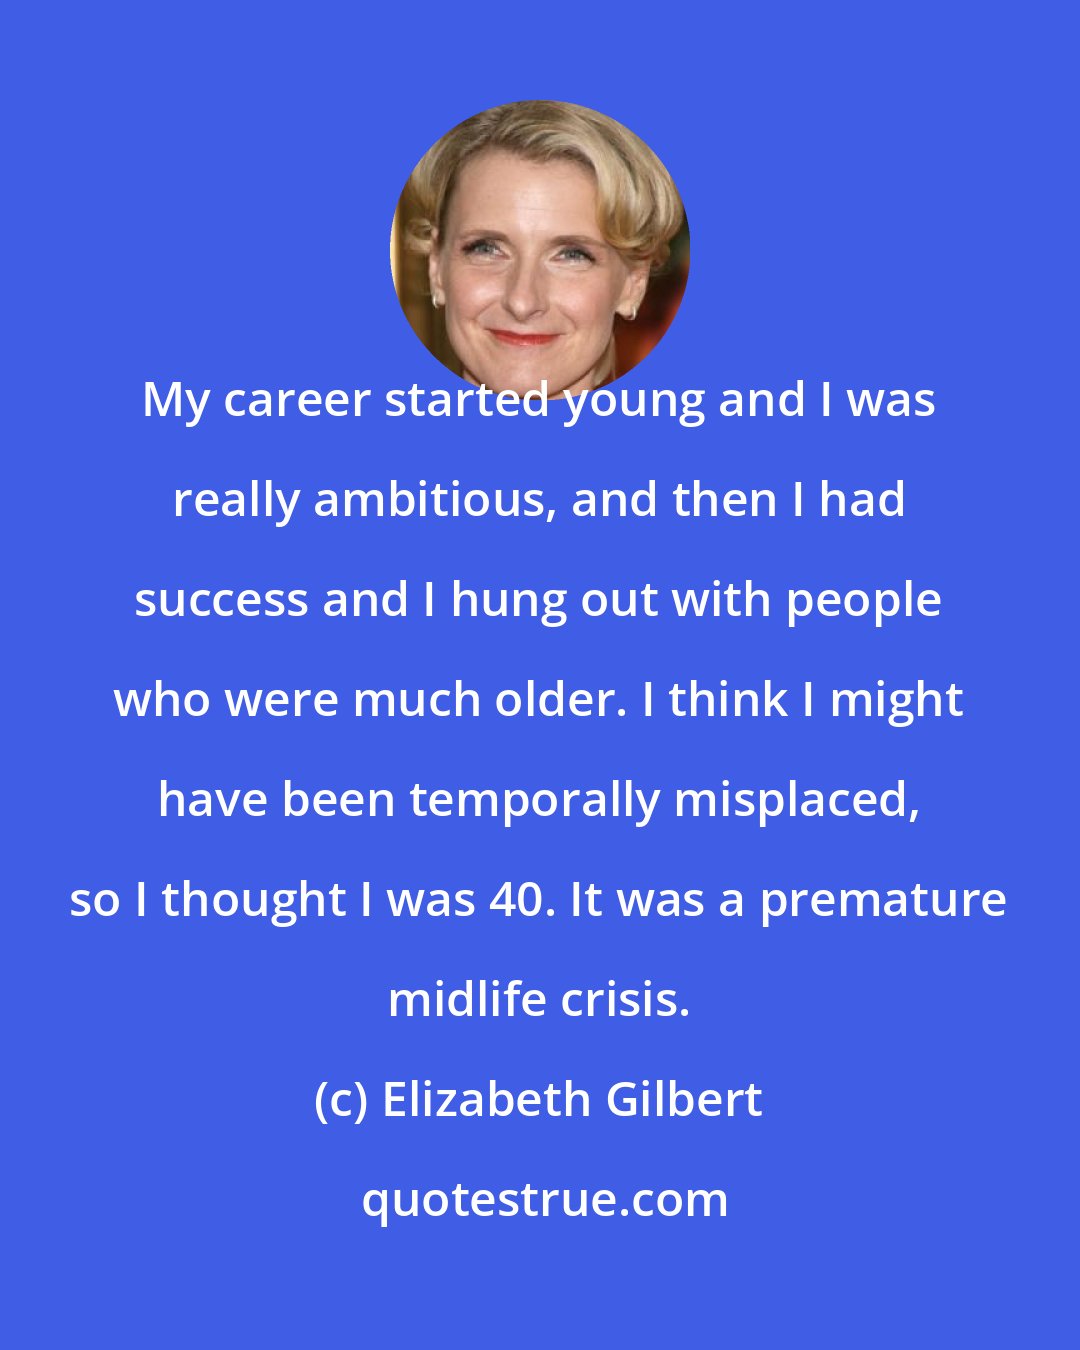 Elizabeth Gilbert: My career started young and I was really ambitious, and then I had success and I hung out with people who were much older. I think I might have been temporally misplaced, so I thought I was 40. It was a premature midlife crisis.